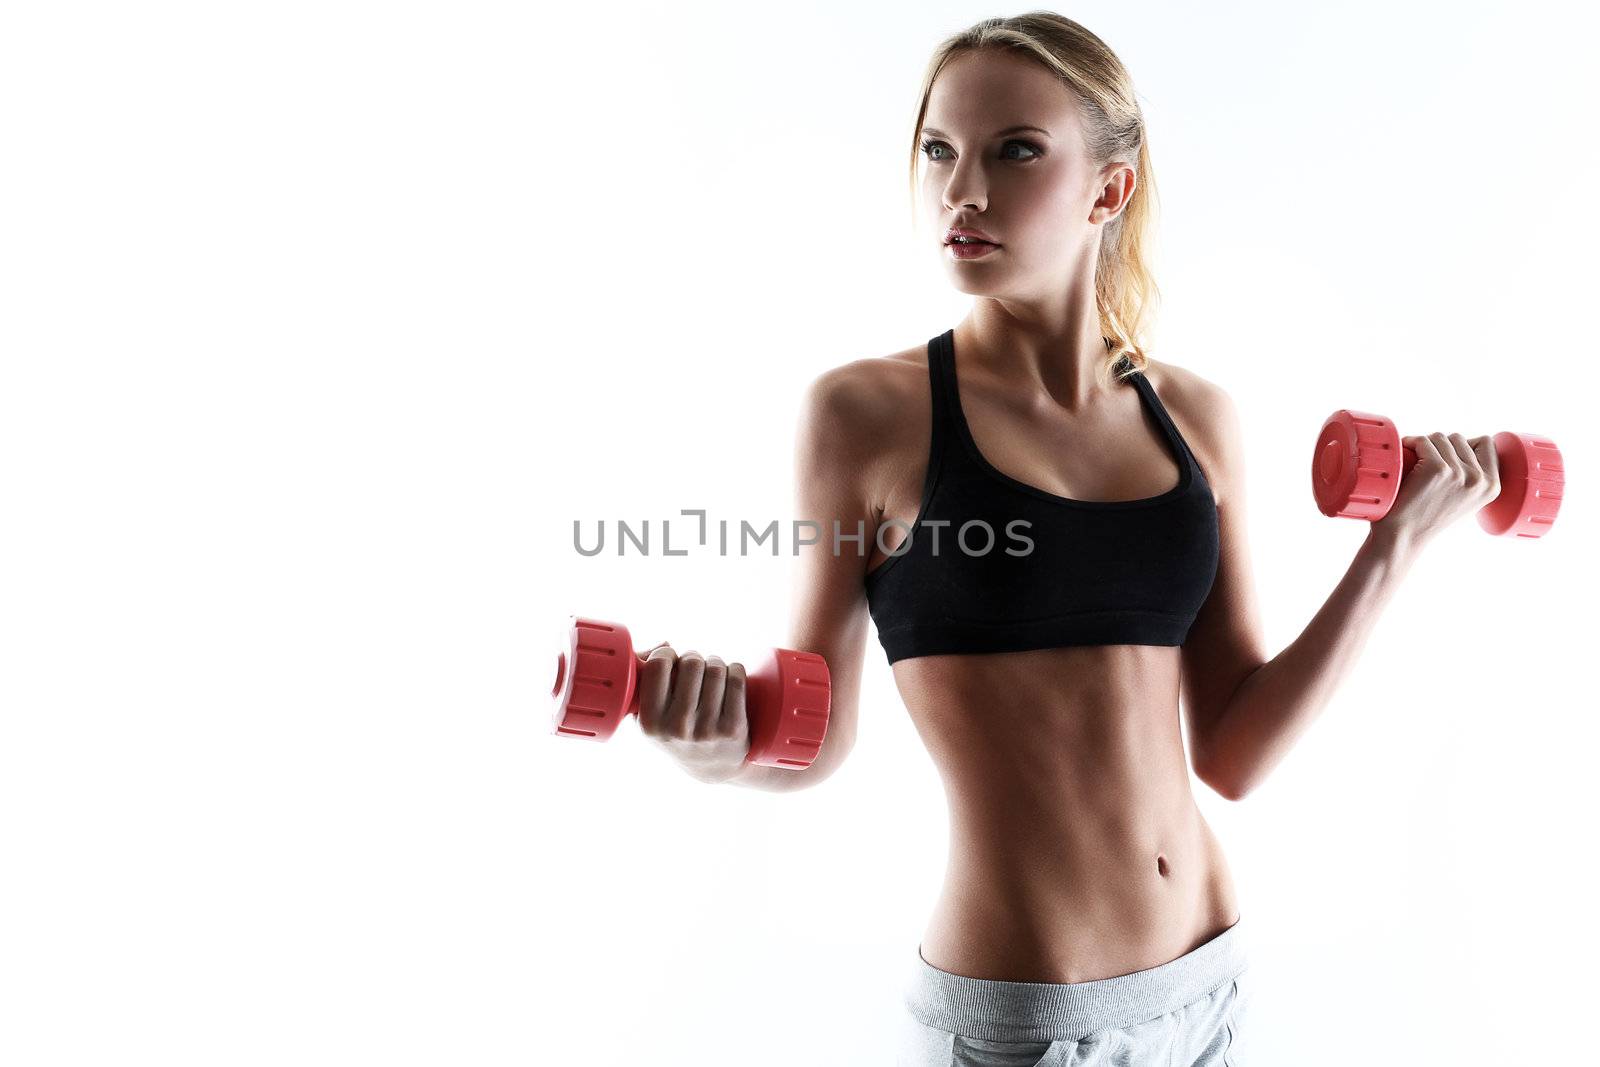 sporty and attractive woman do exercise with red dumbbells